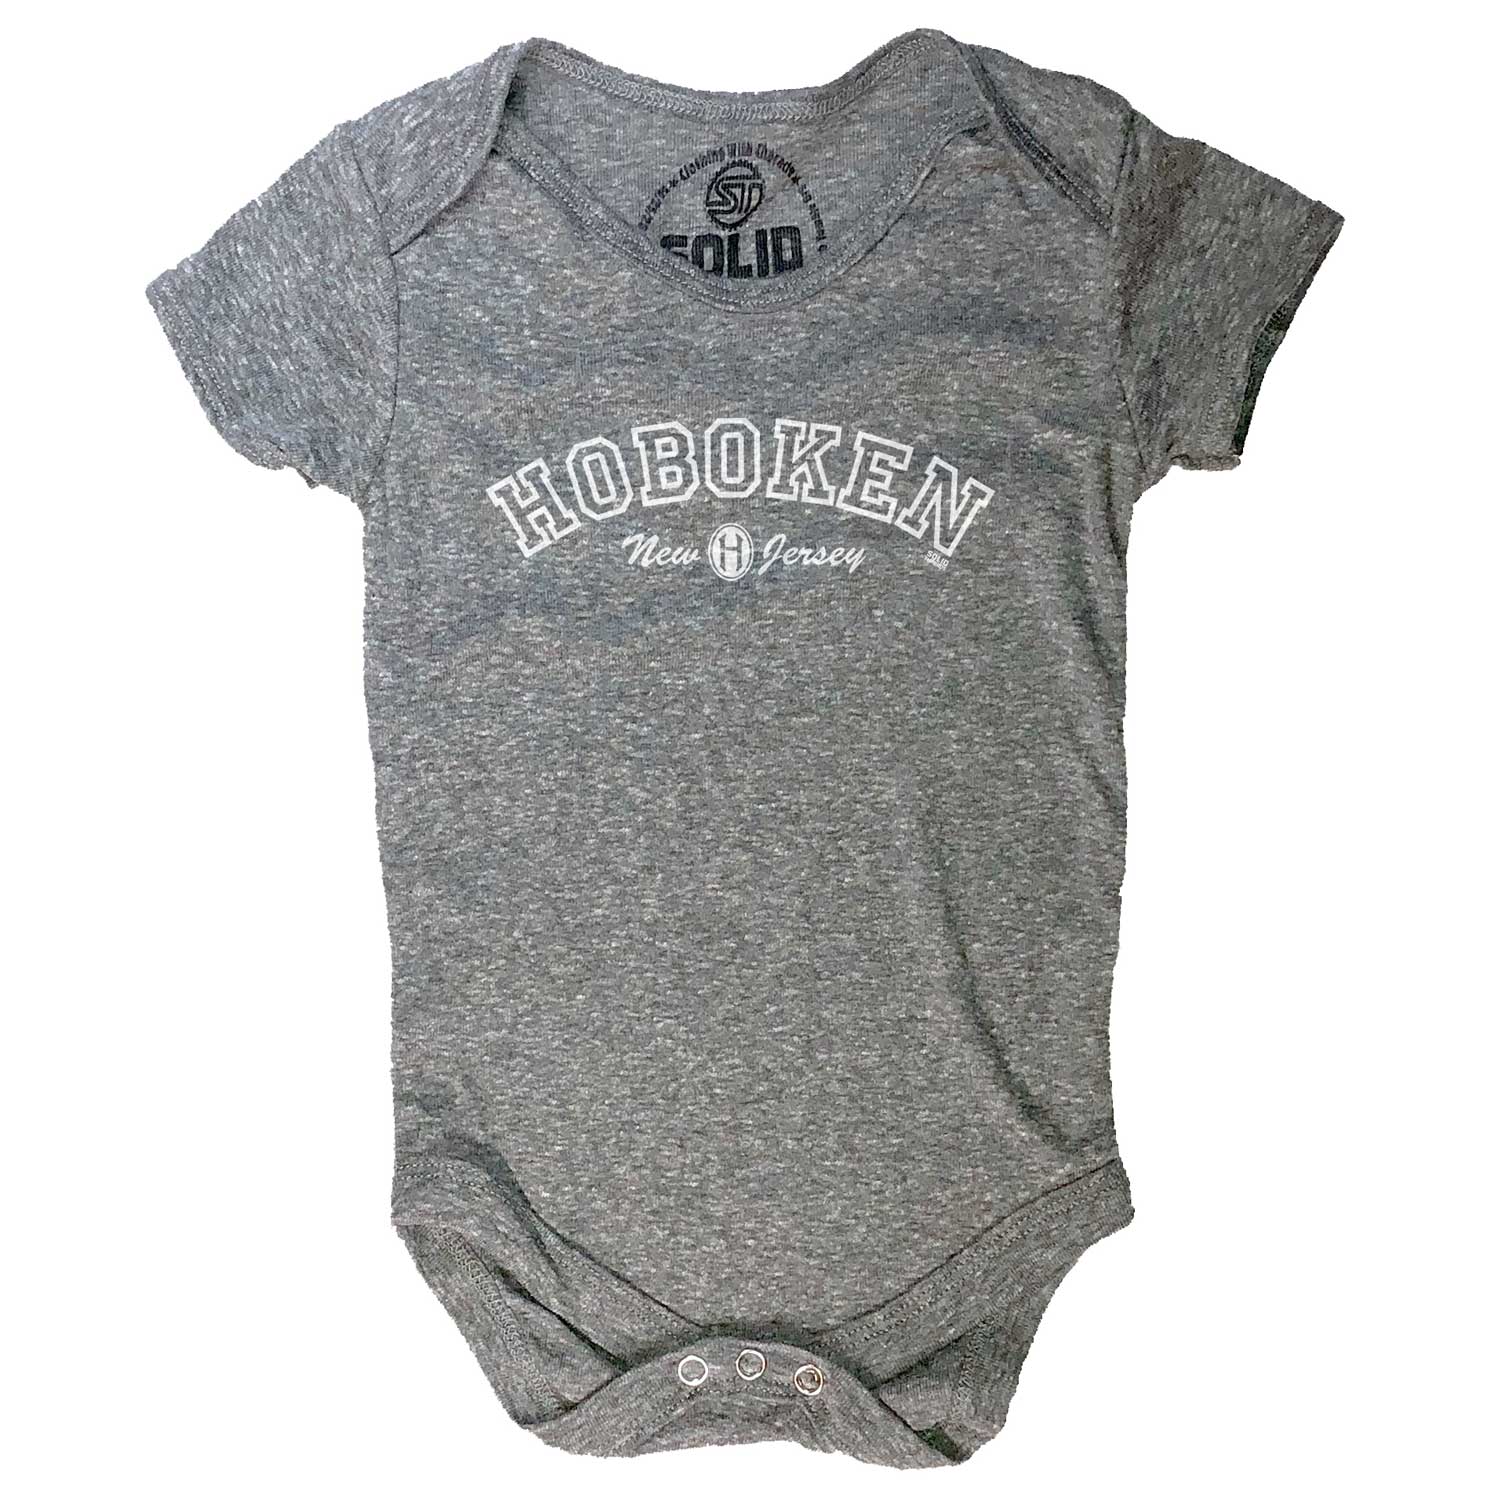 Baby Hoboken Collegiate Cool Graphic One Piece | Retro New Jersey Soft Romper | Solid Threads